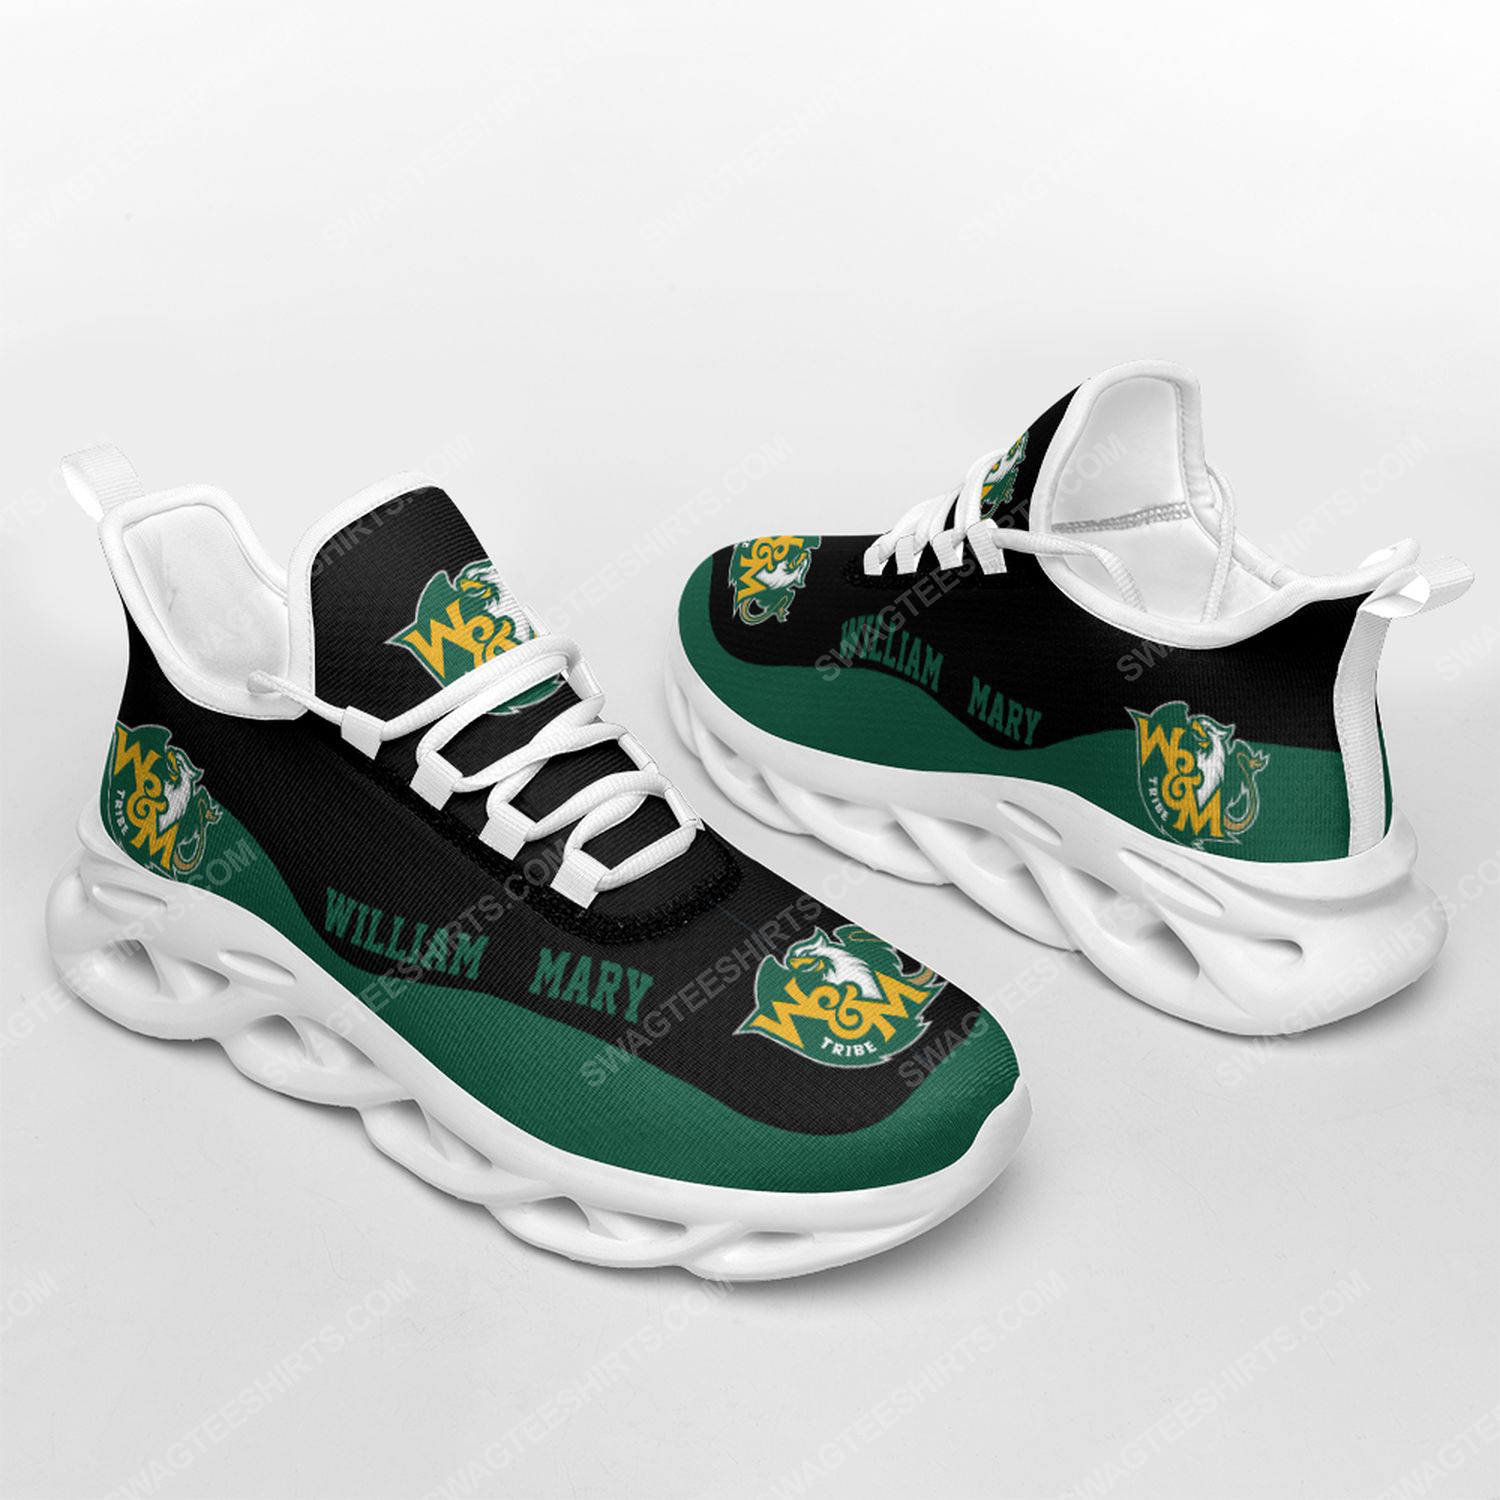 [special edition] The william and mary tribe football team max soul shoes – Maria